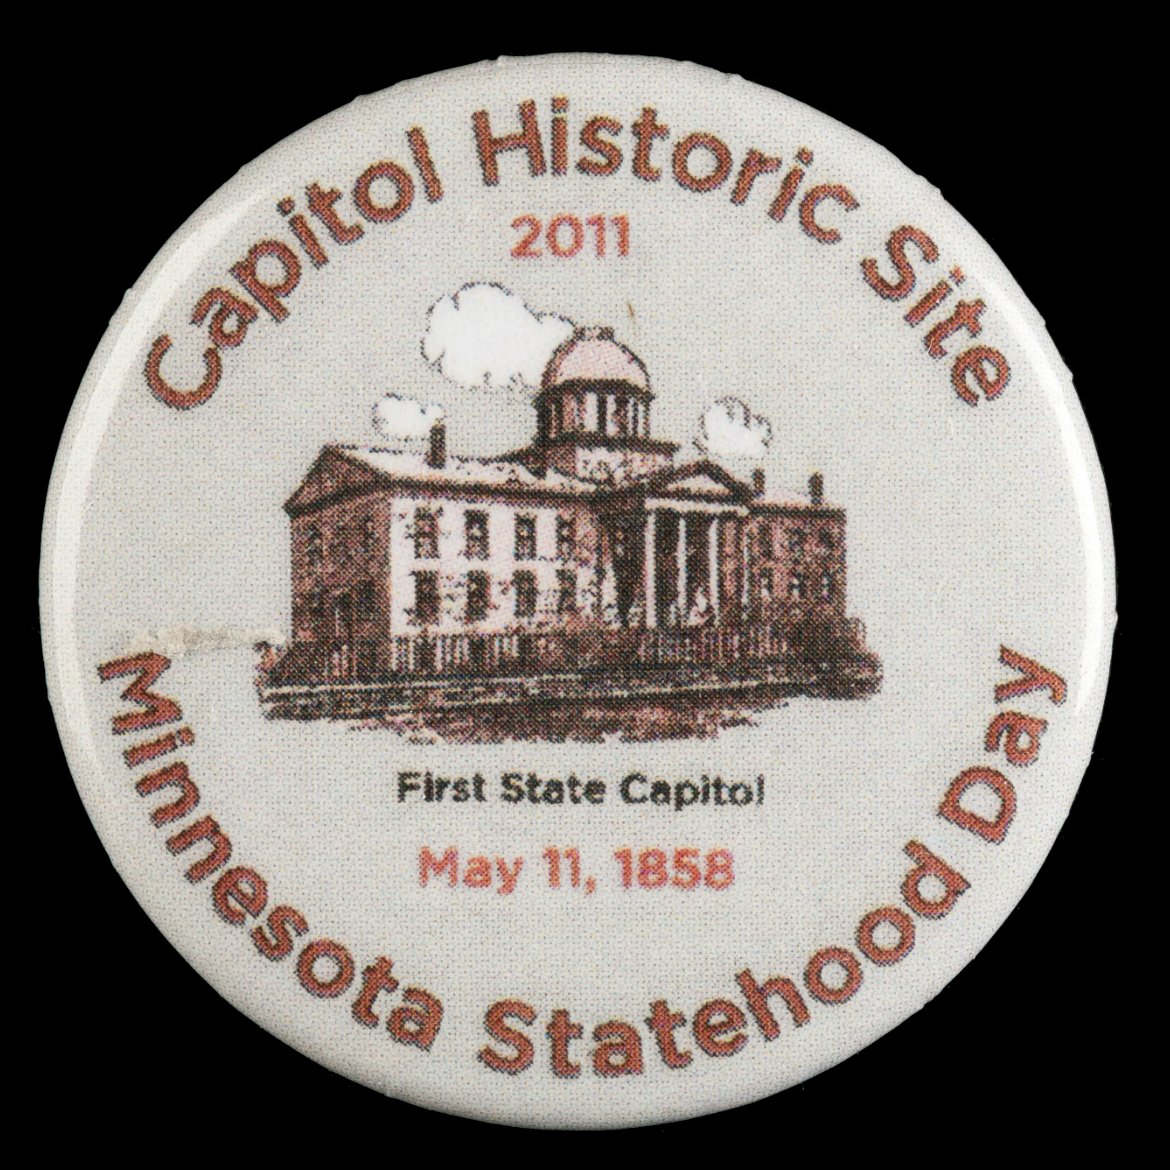 #OnThisDay, May 11, 1858, Minnesota became the thirty-second state. The enabling act for statehood had been passed on February 26, 1857, and the state's constitution was written that summer and ratified in October. Word of statehood would not reach St. Paul until May 13.